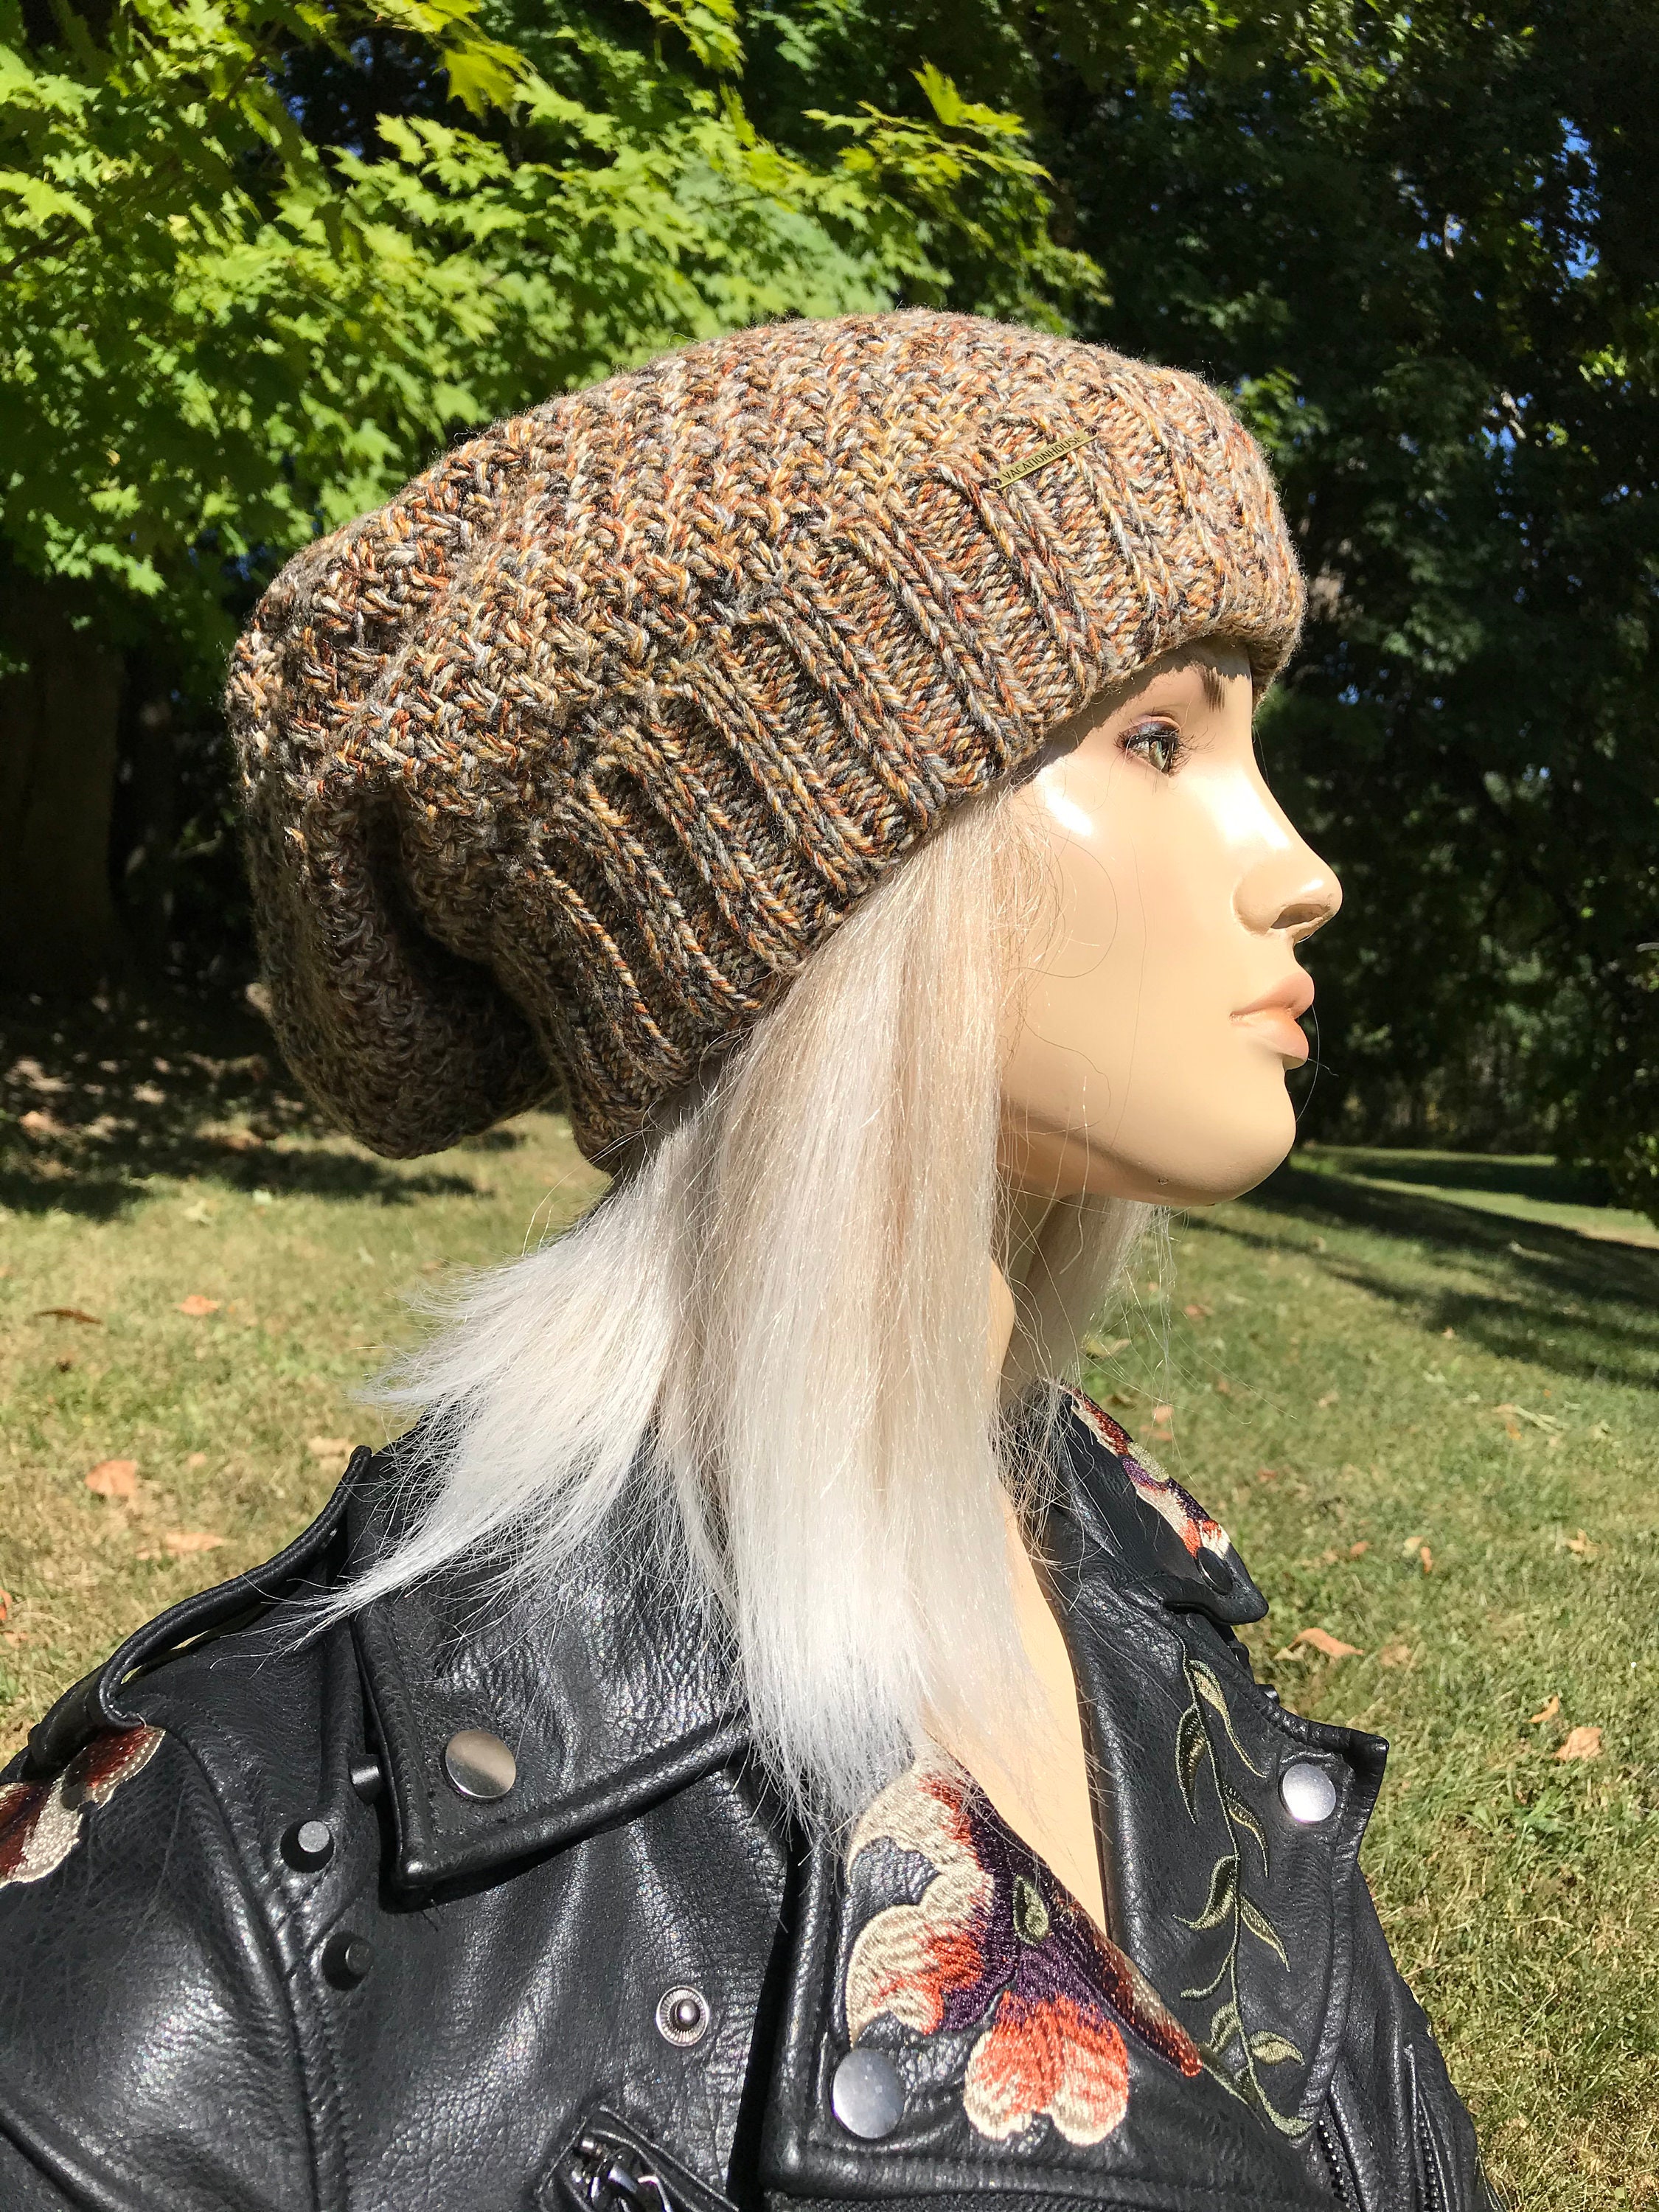 New Slouchy Hat Wool Blend Winter Beanie Brown Tan Cuffed Tweed Slouch Tams Women's Warm Bohemian Grunge Clothing Vacationhouse Hats A1810